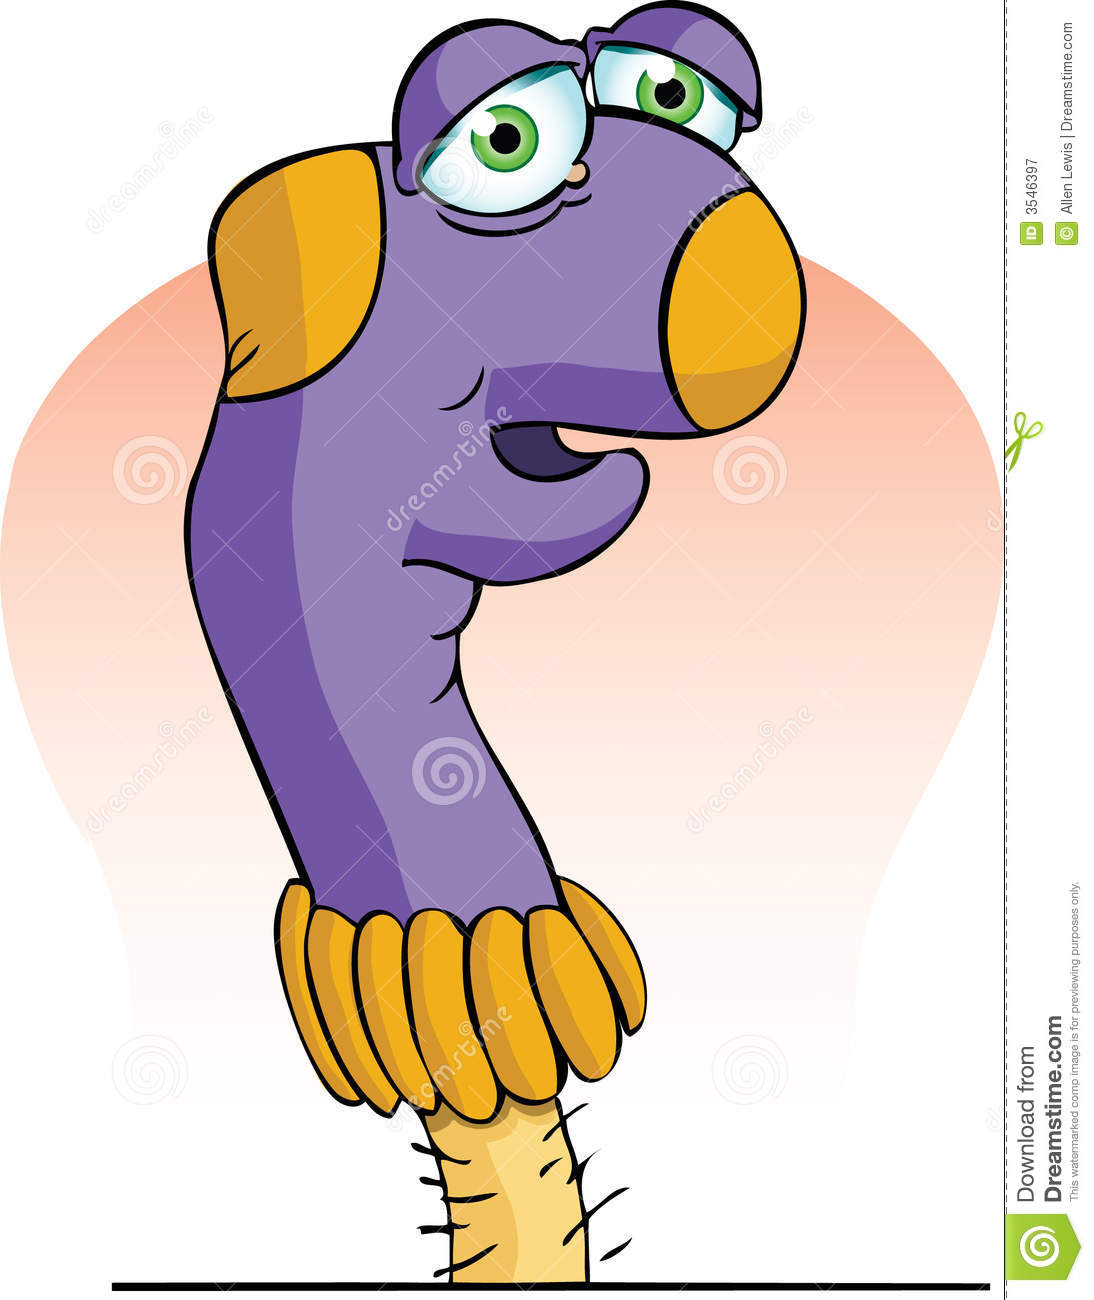 Sock Puppet Royalty Free Stock Photography   Image  3546397